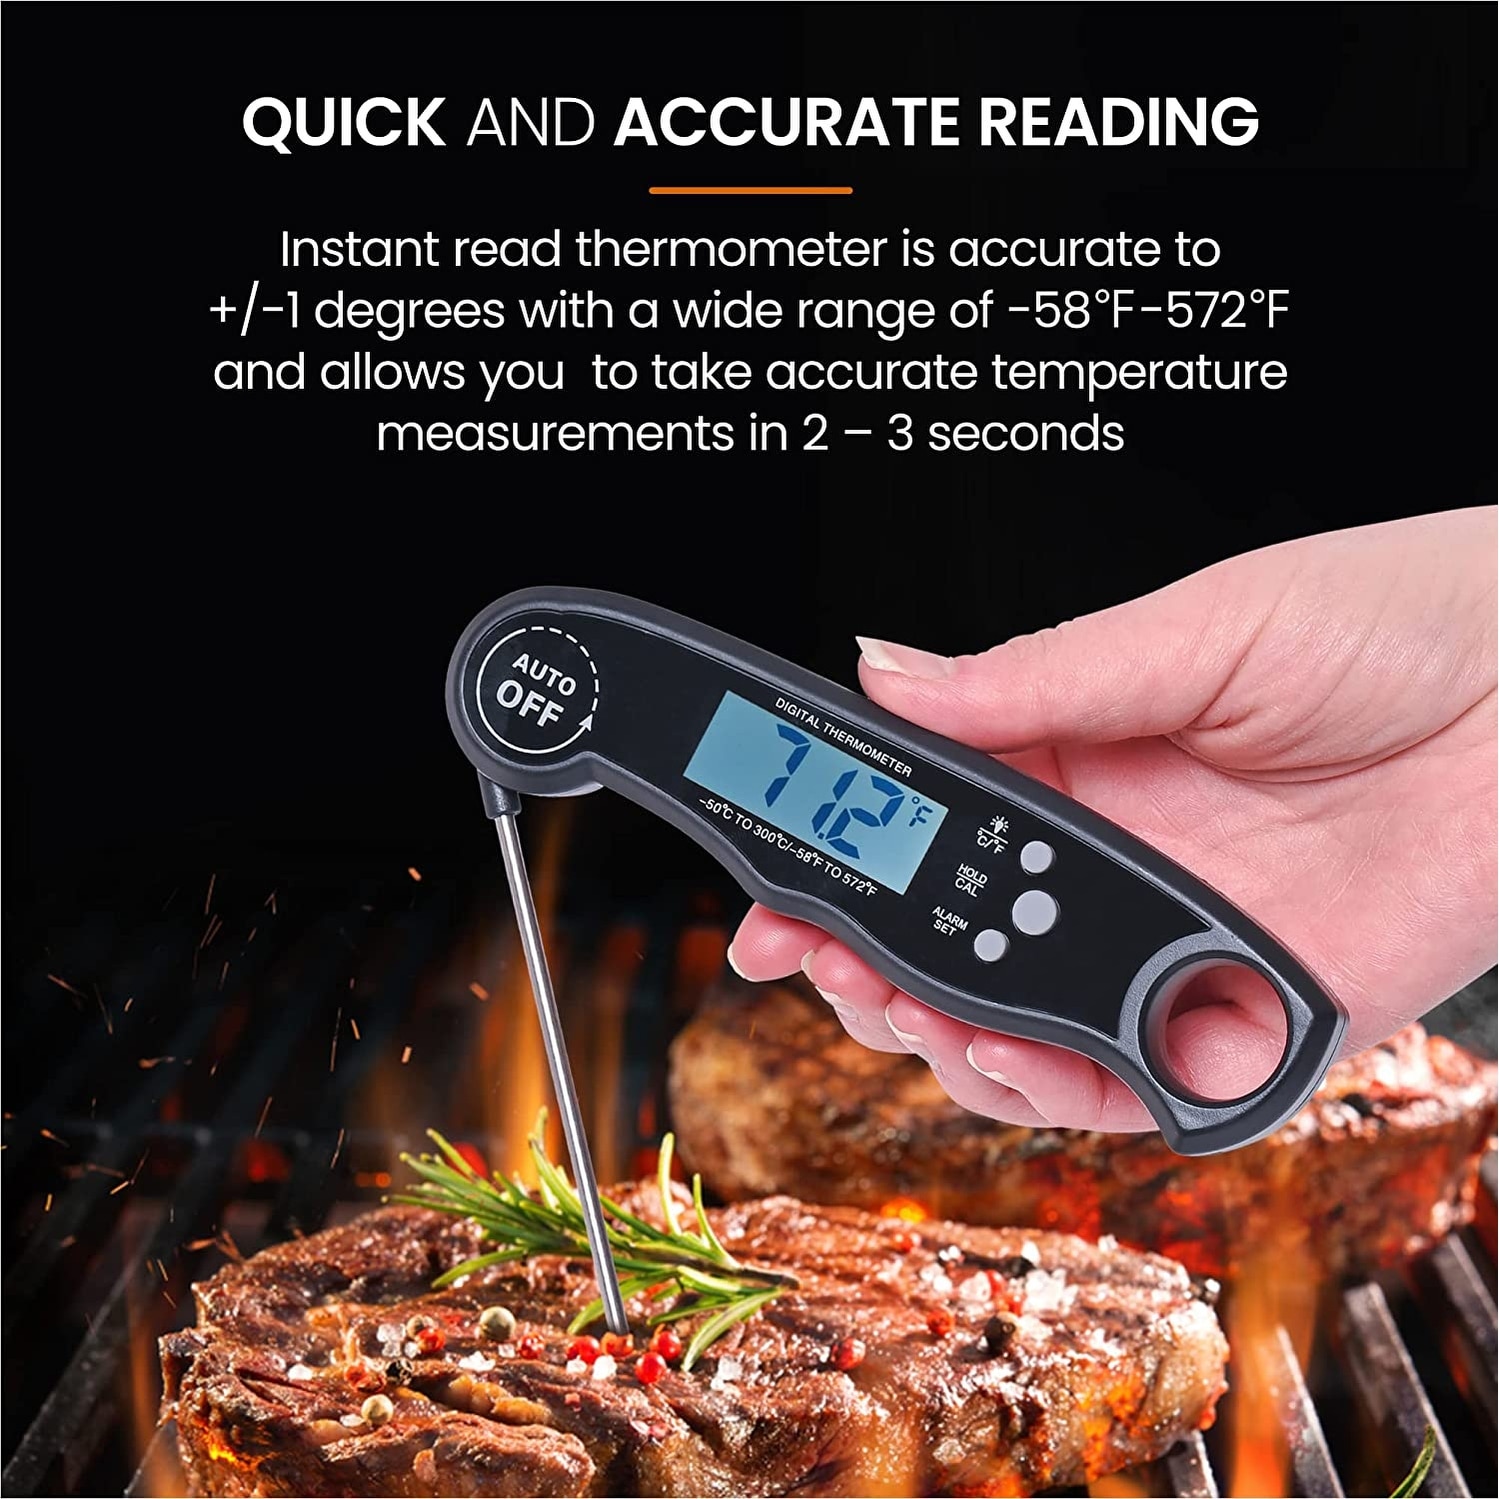 https://ak1.ostkcdn.com/images/products/is/images/direct/f86401e41e63dbb1844a830a2f9627c7fc716bc9/Cheer-Collection-Digital-Meat-Thermometer.jpg